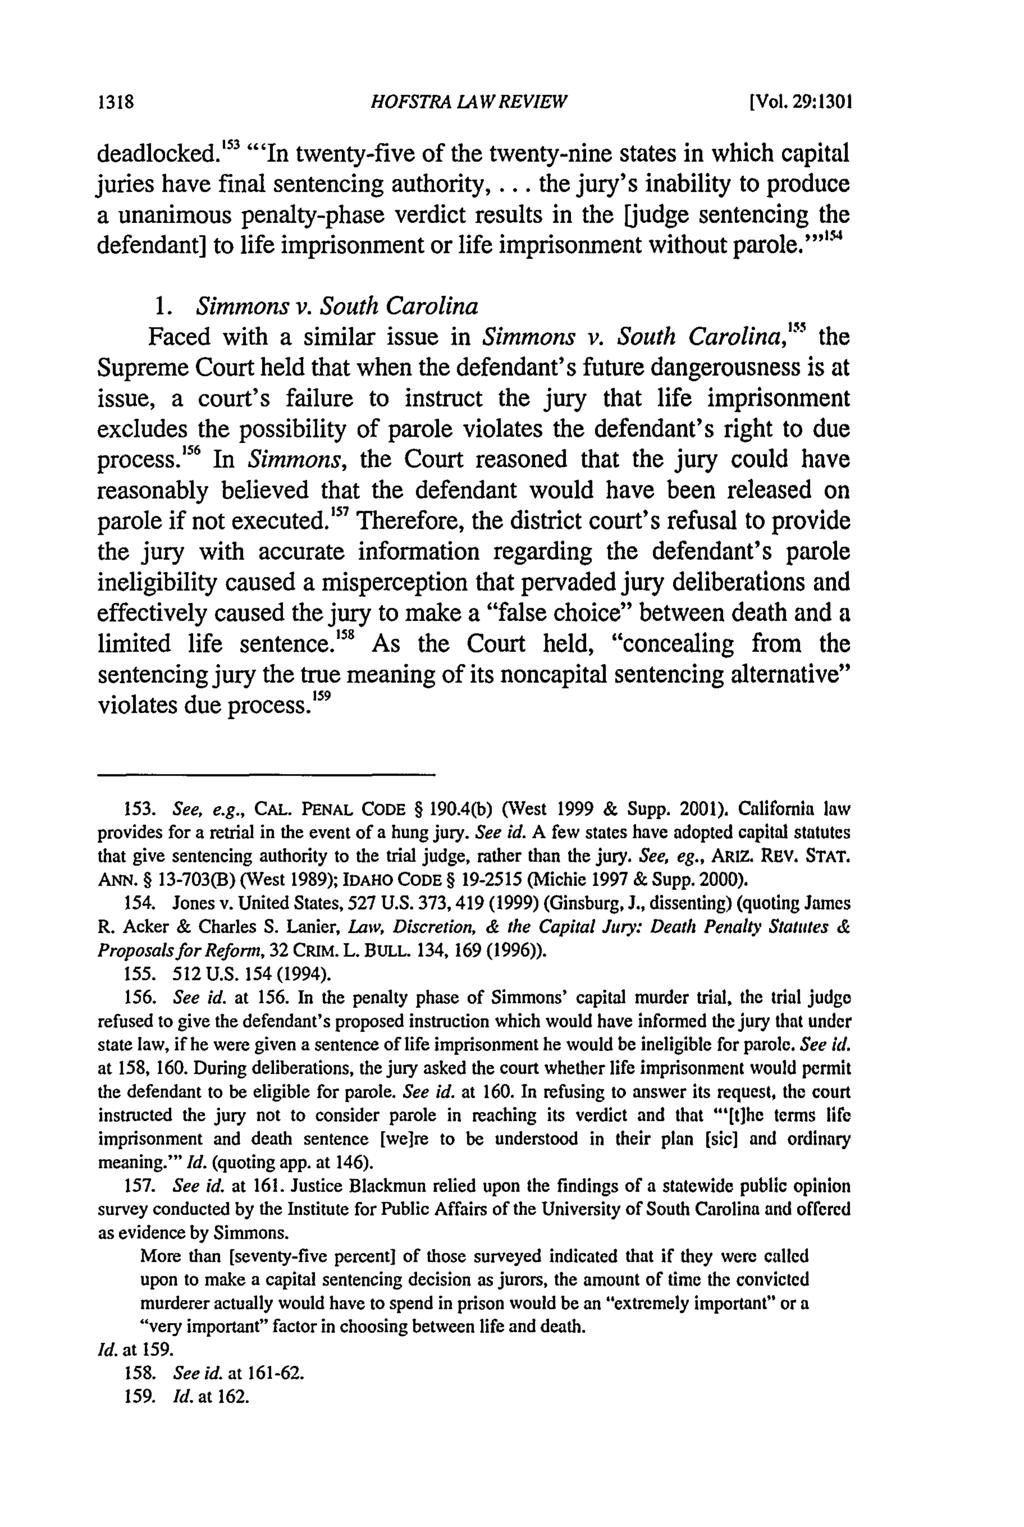 Hofstra Law Review, Vol. 29, Iss. 4 [2001], Art. 11 HOFSTRA LAW REVIEW [Vol. 29:1301 deadlocked.' "'In twenty-five of the twenty-nine states in which capital juries have final sentencing authority.